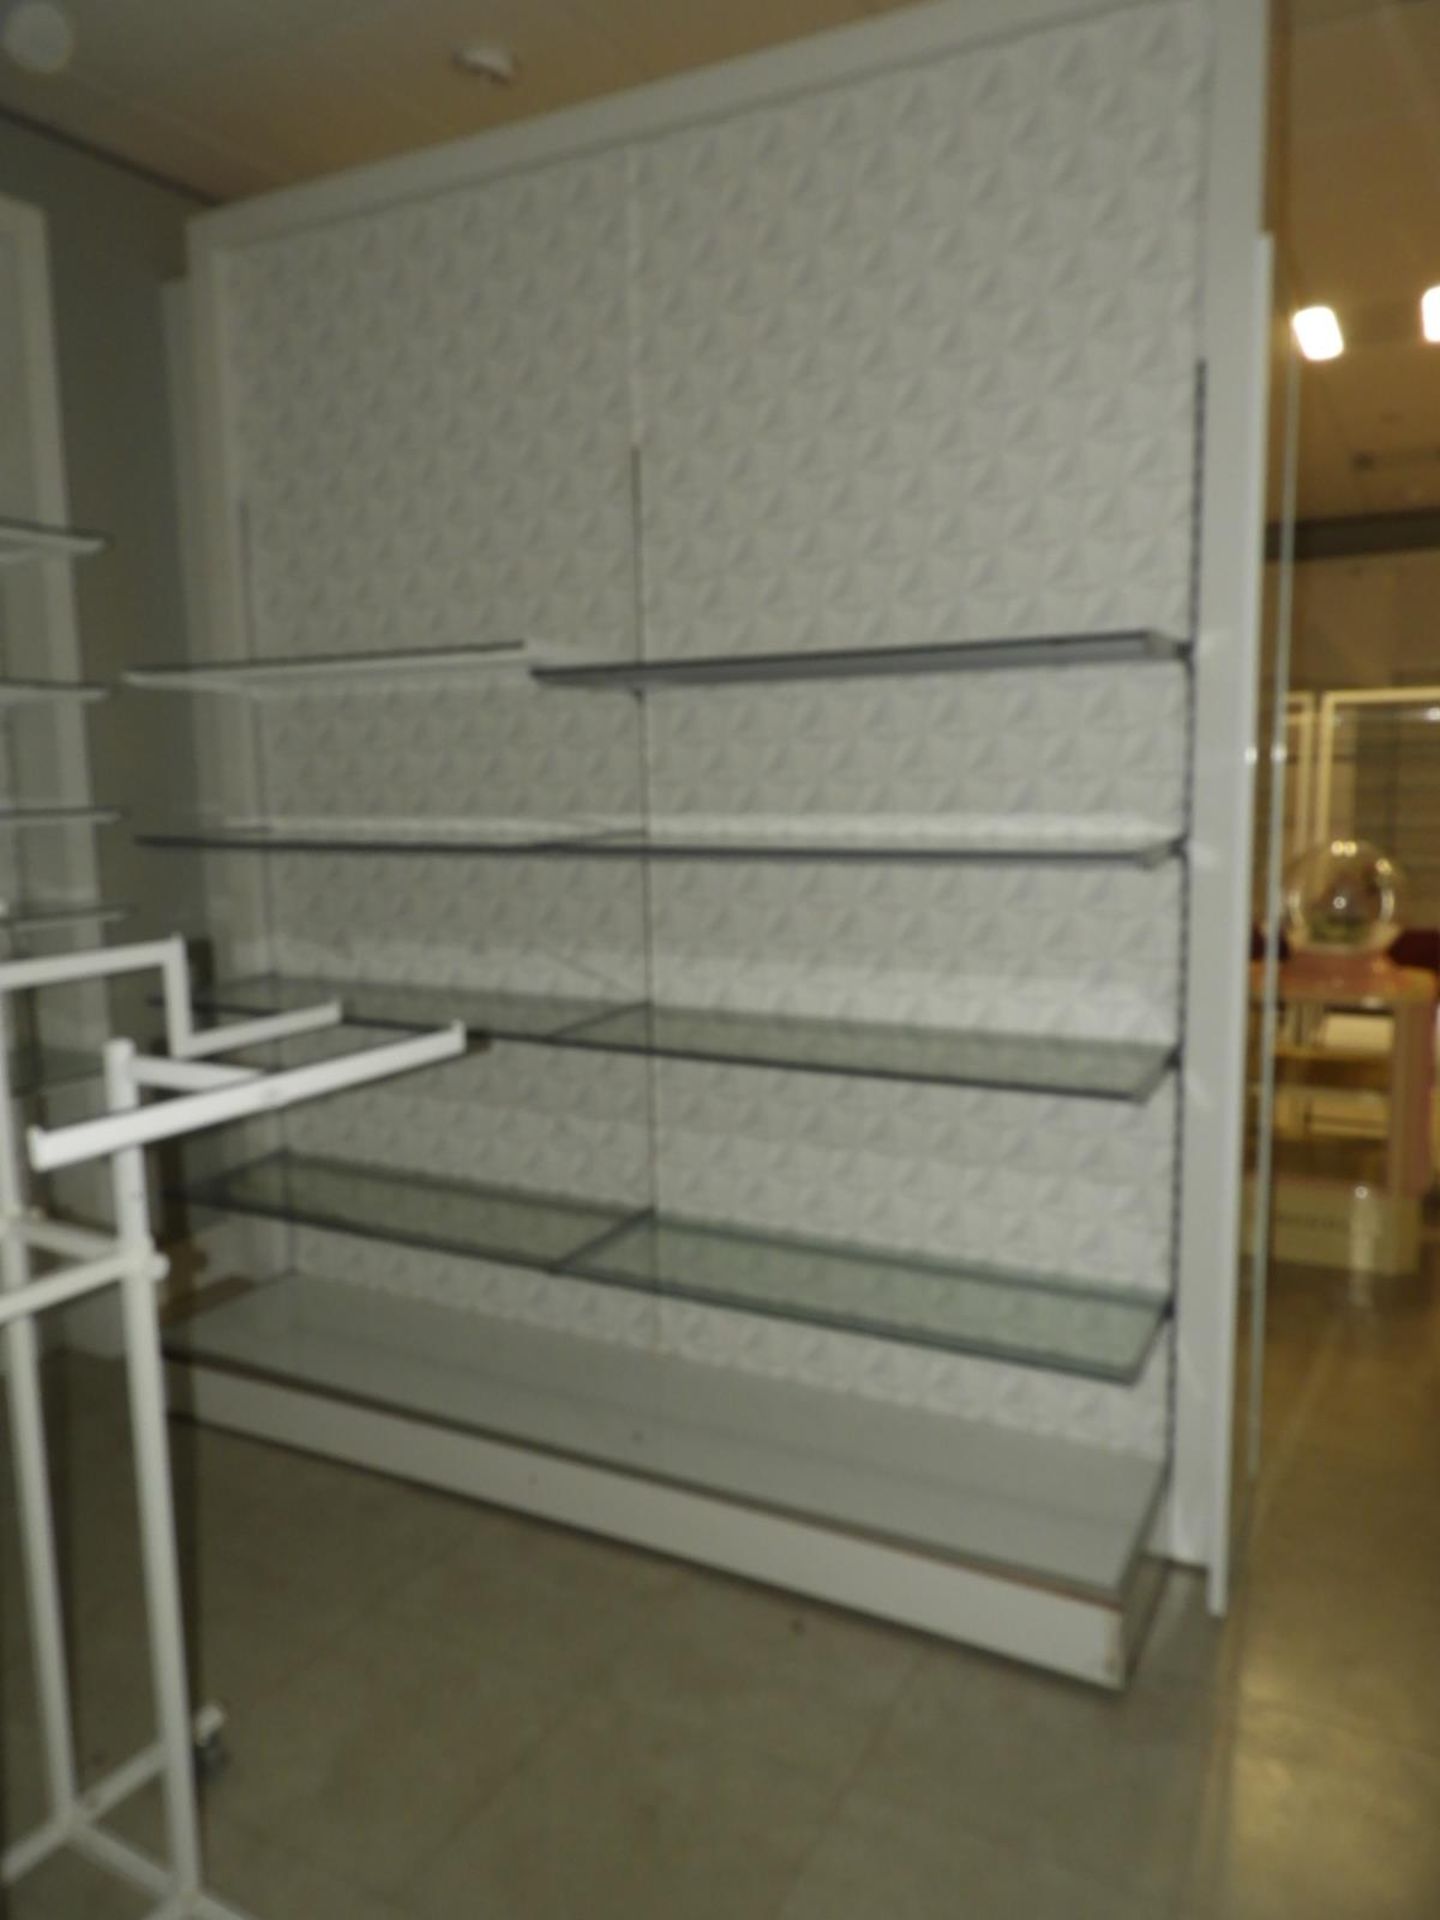 *Freestanding Double Sided Shelf Unit with Eightee